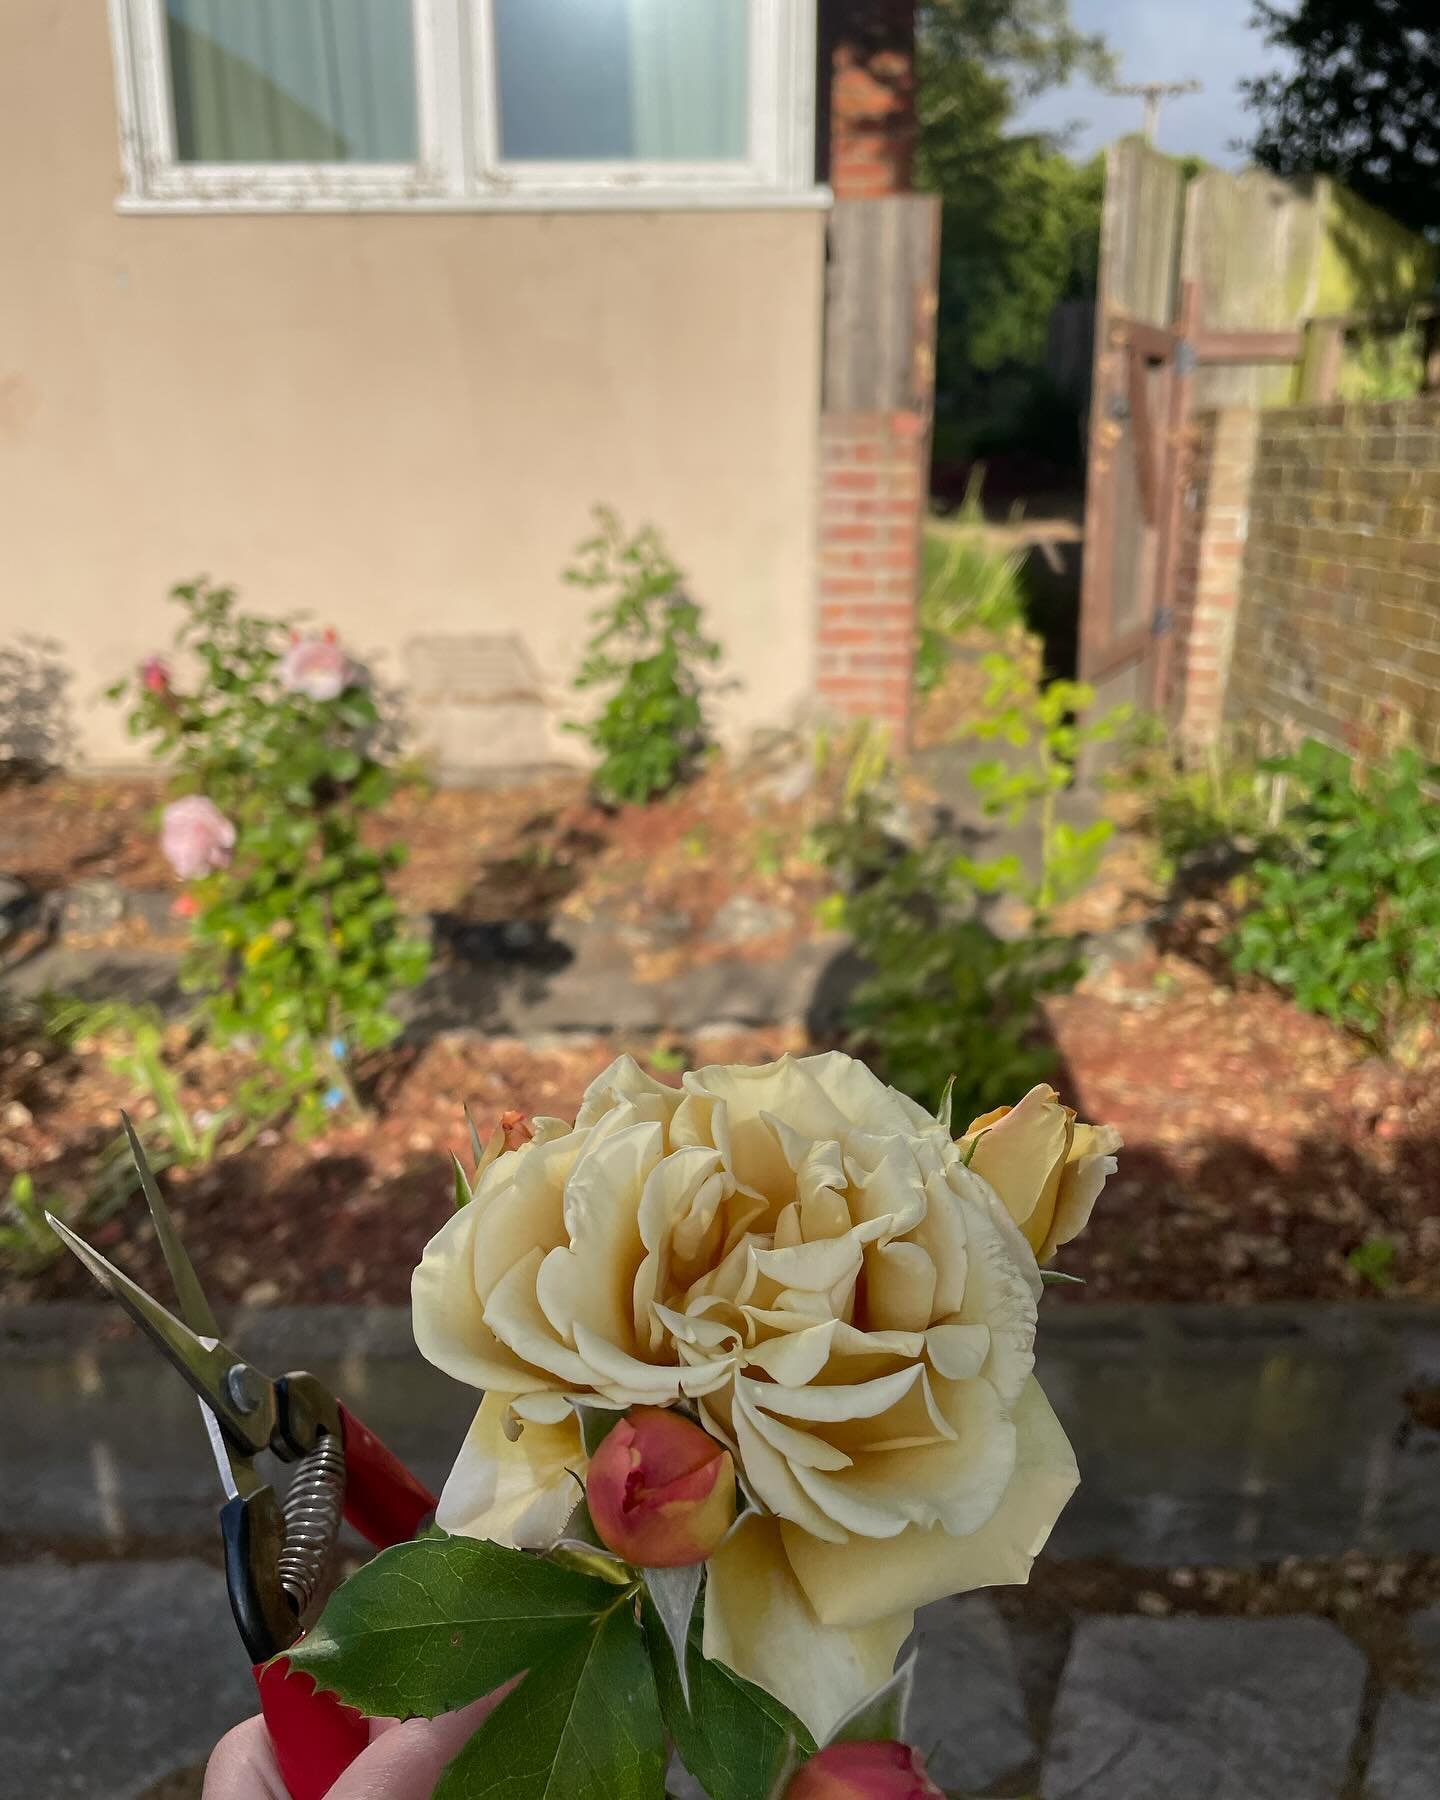 Roses have long been a dream flower for me to be able to grow on my own. My mom always had rose plants, and Rose is a family name on my Dad&rsquo;s side. They are such a special flower

So this winter I made it happen in the El Cerrito backyard with 